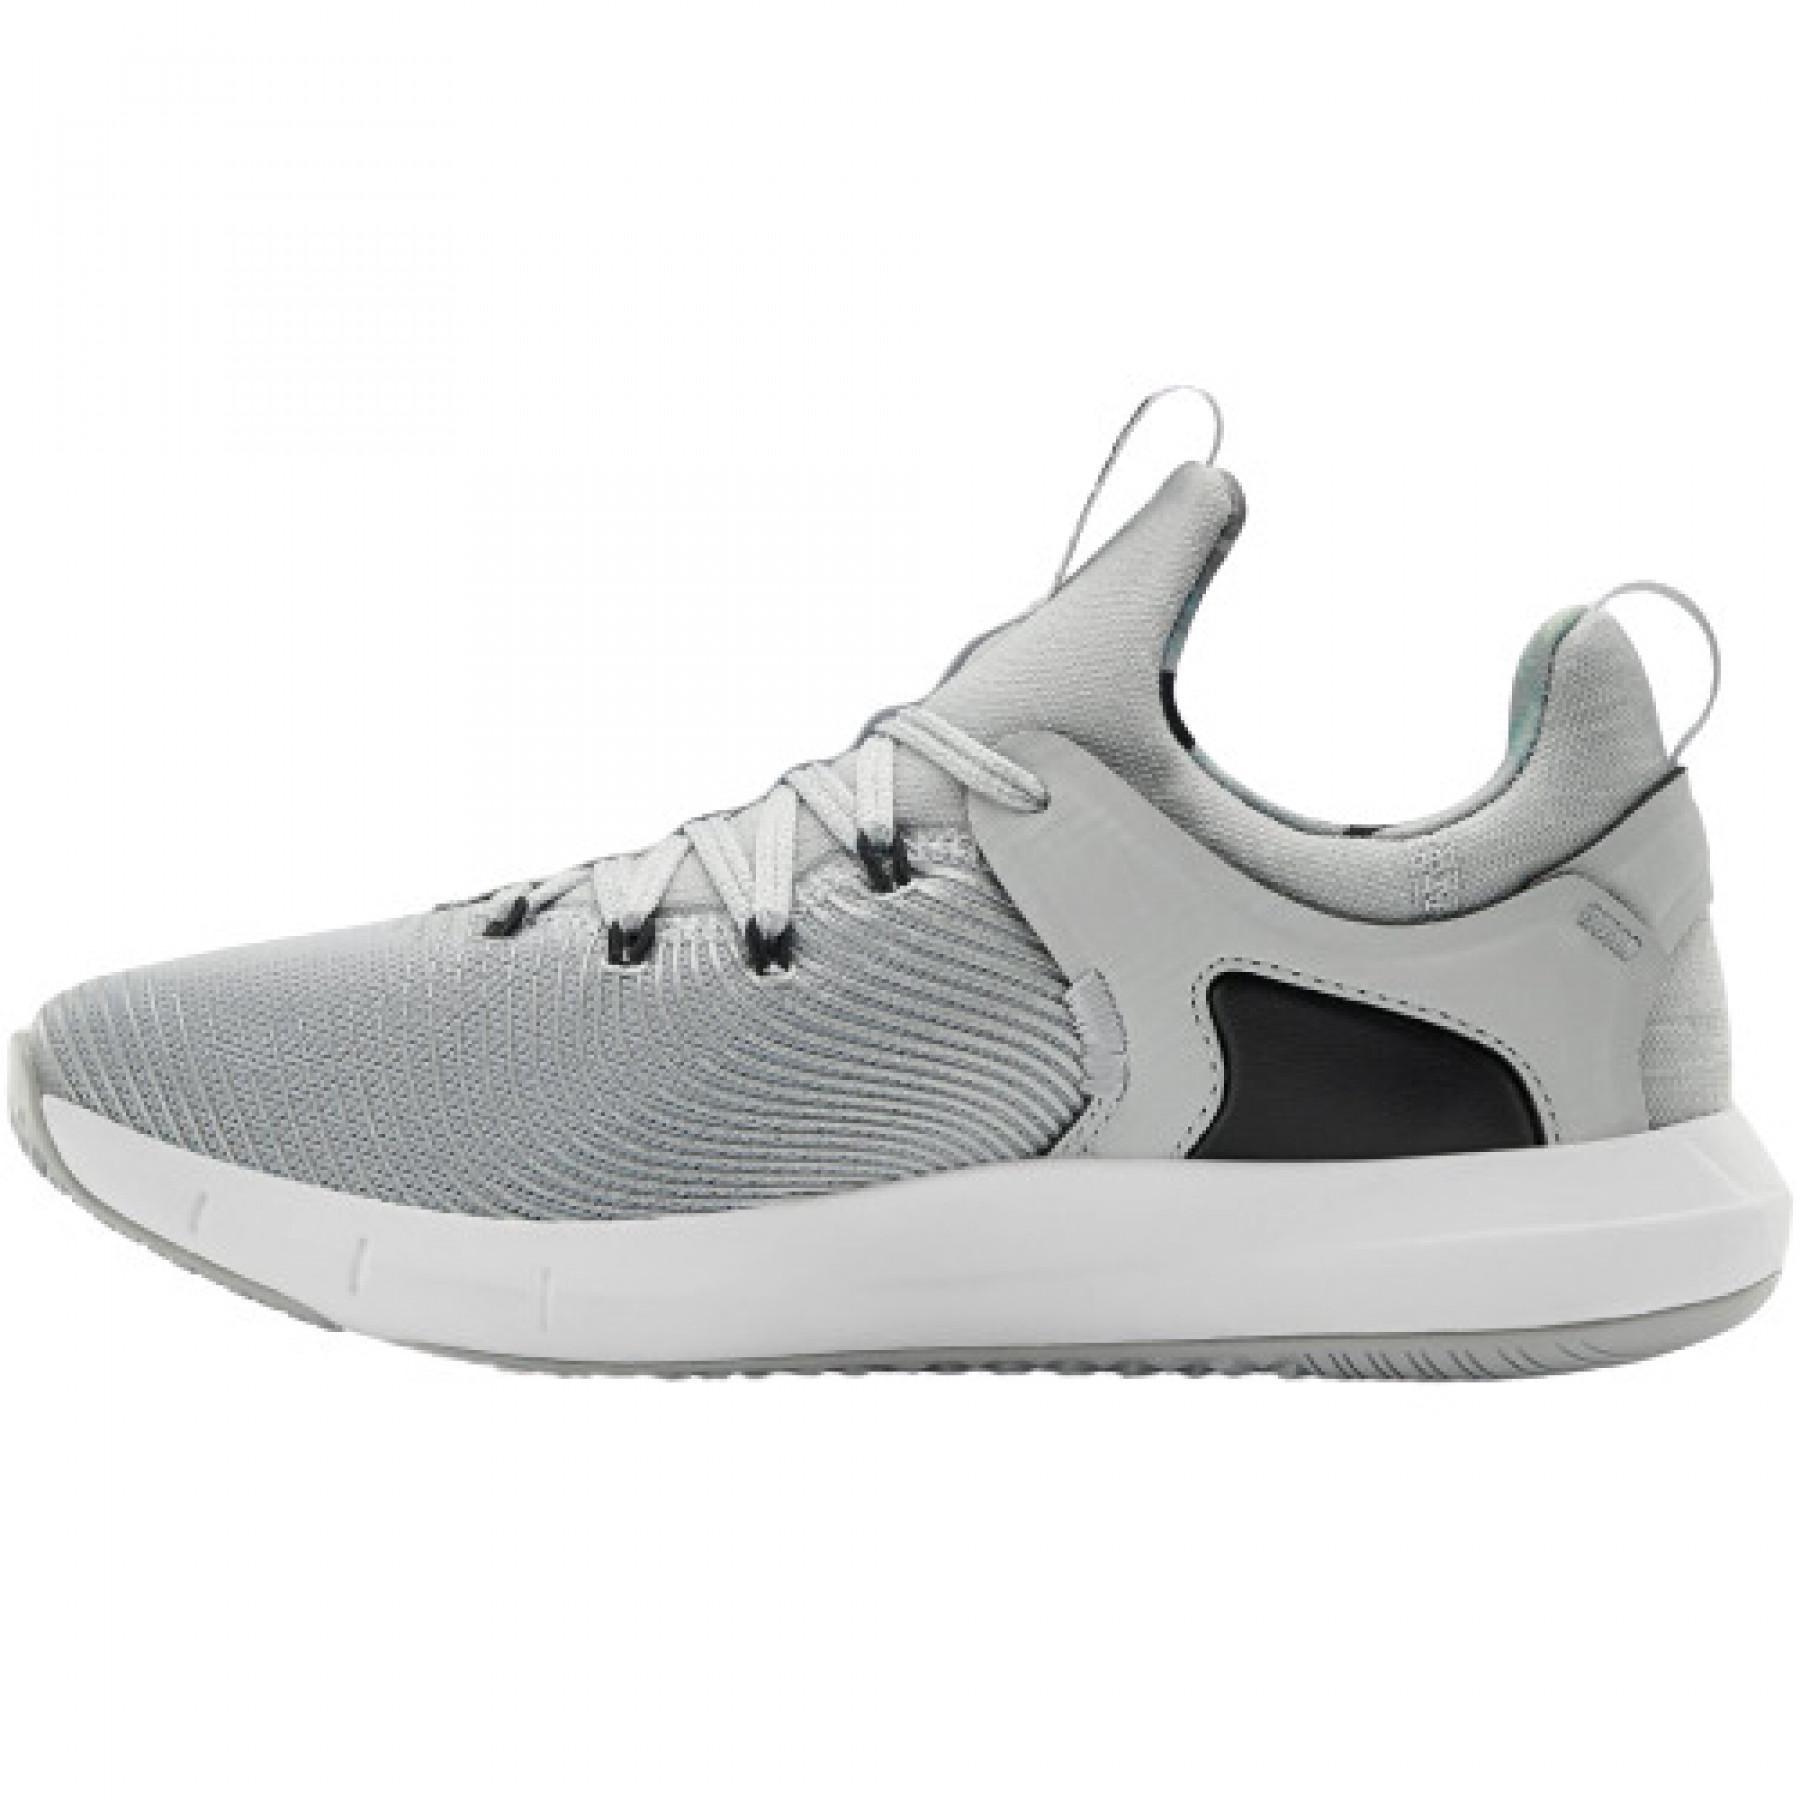 Zapatos de mujer Under Armour HOVR Rise 2 LUX